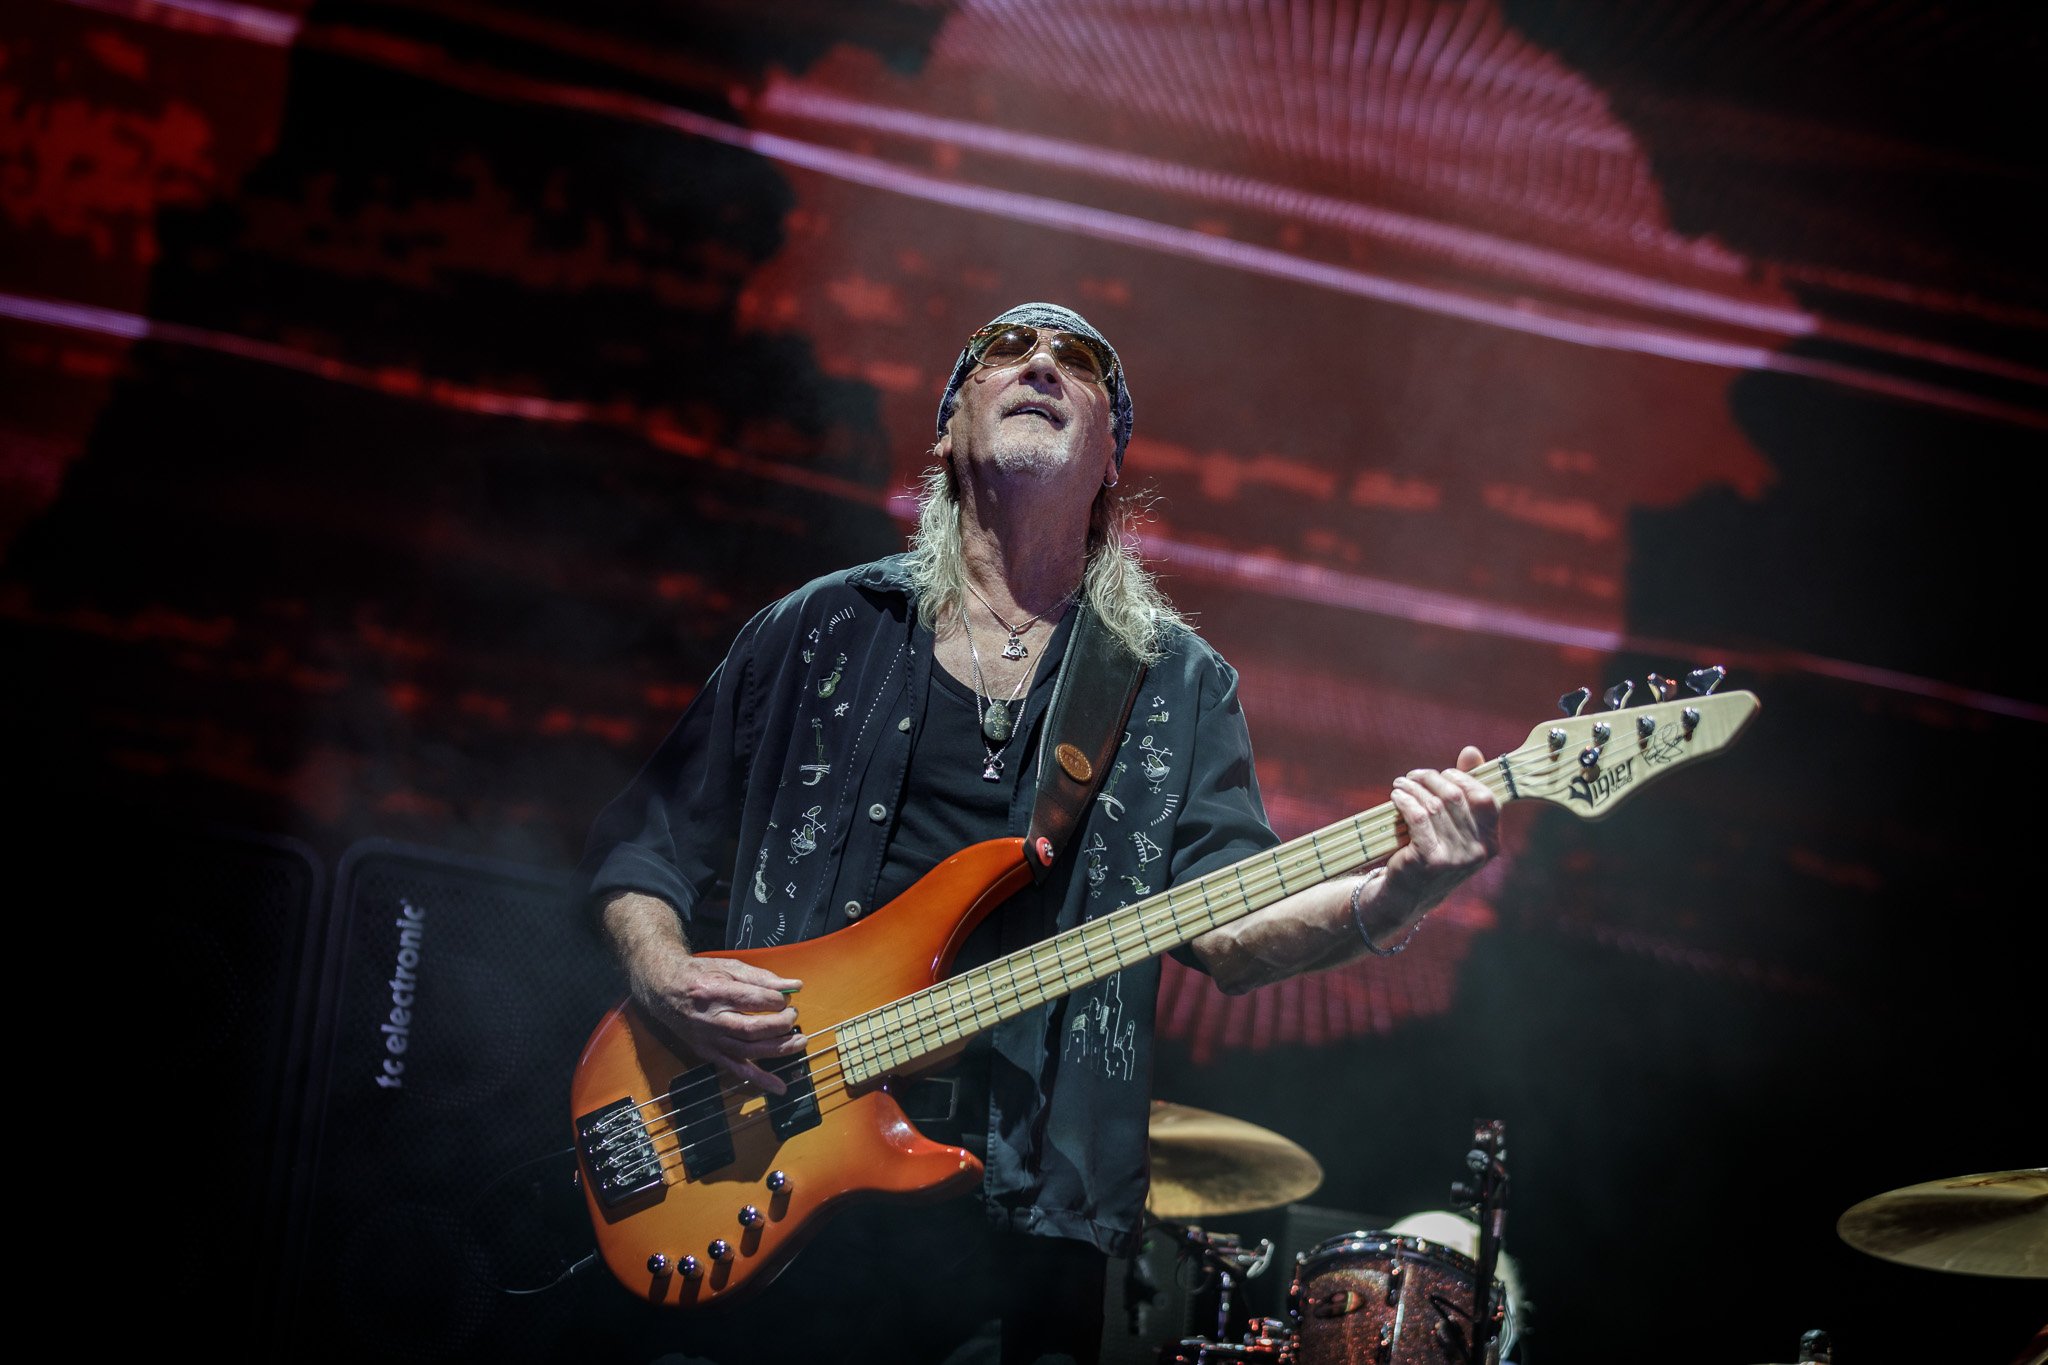 Deep Purple at AO Arena in Manchester on October 26th 2022 ©Joh